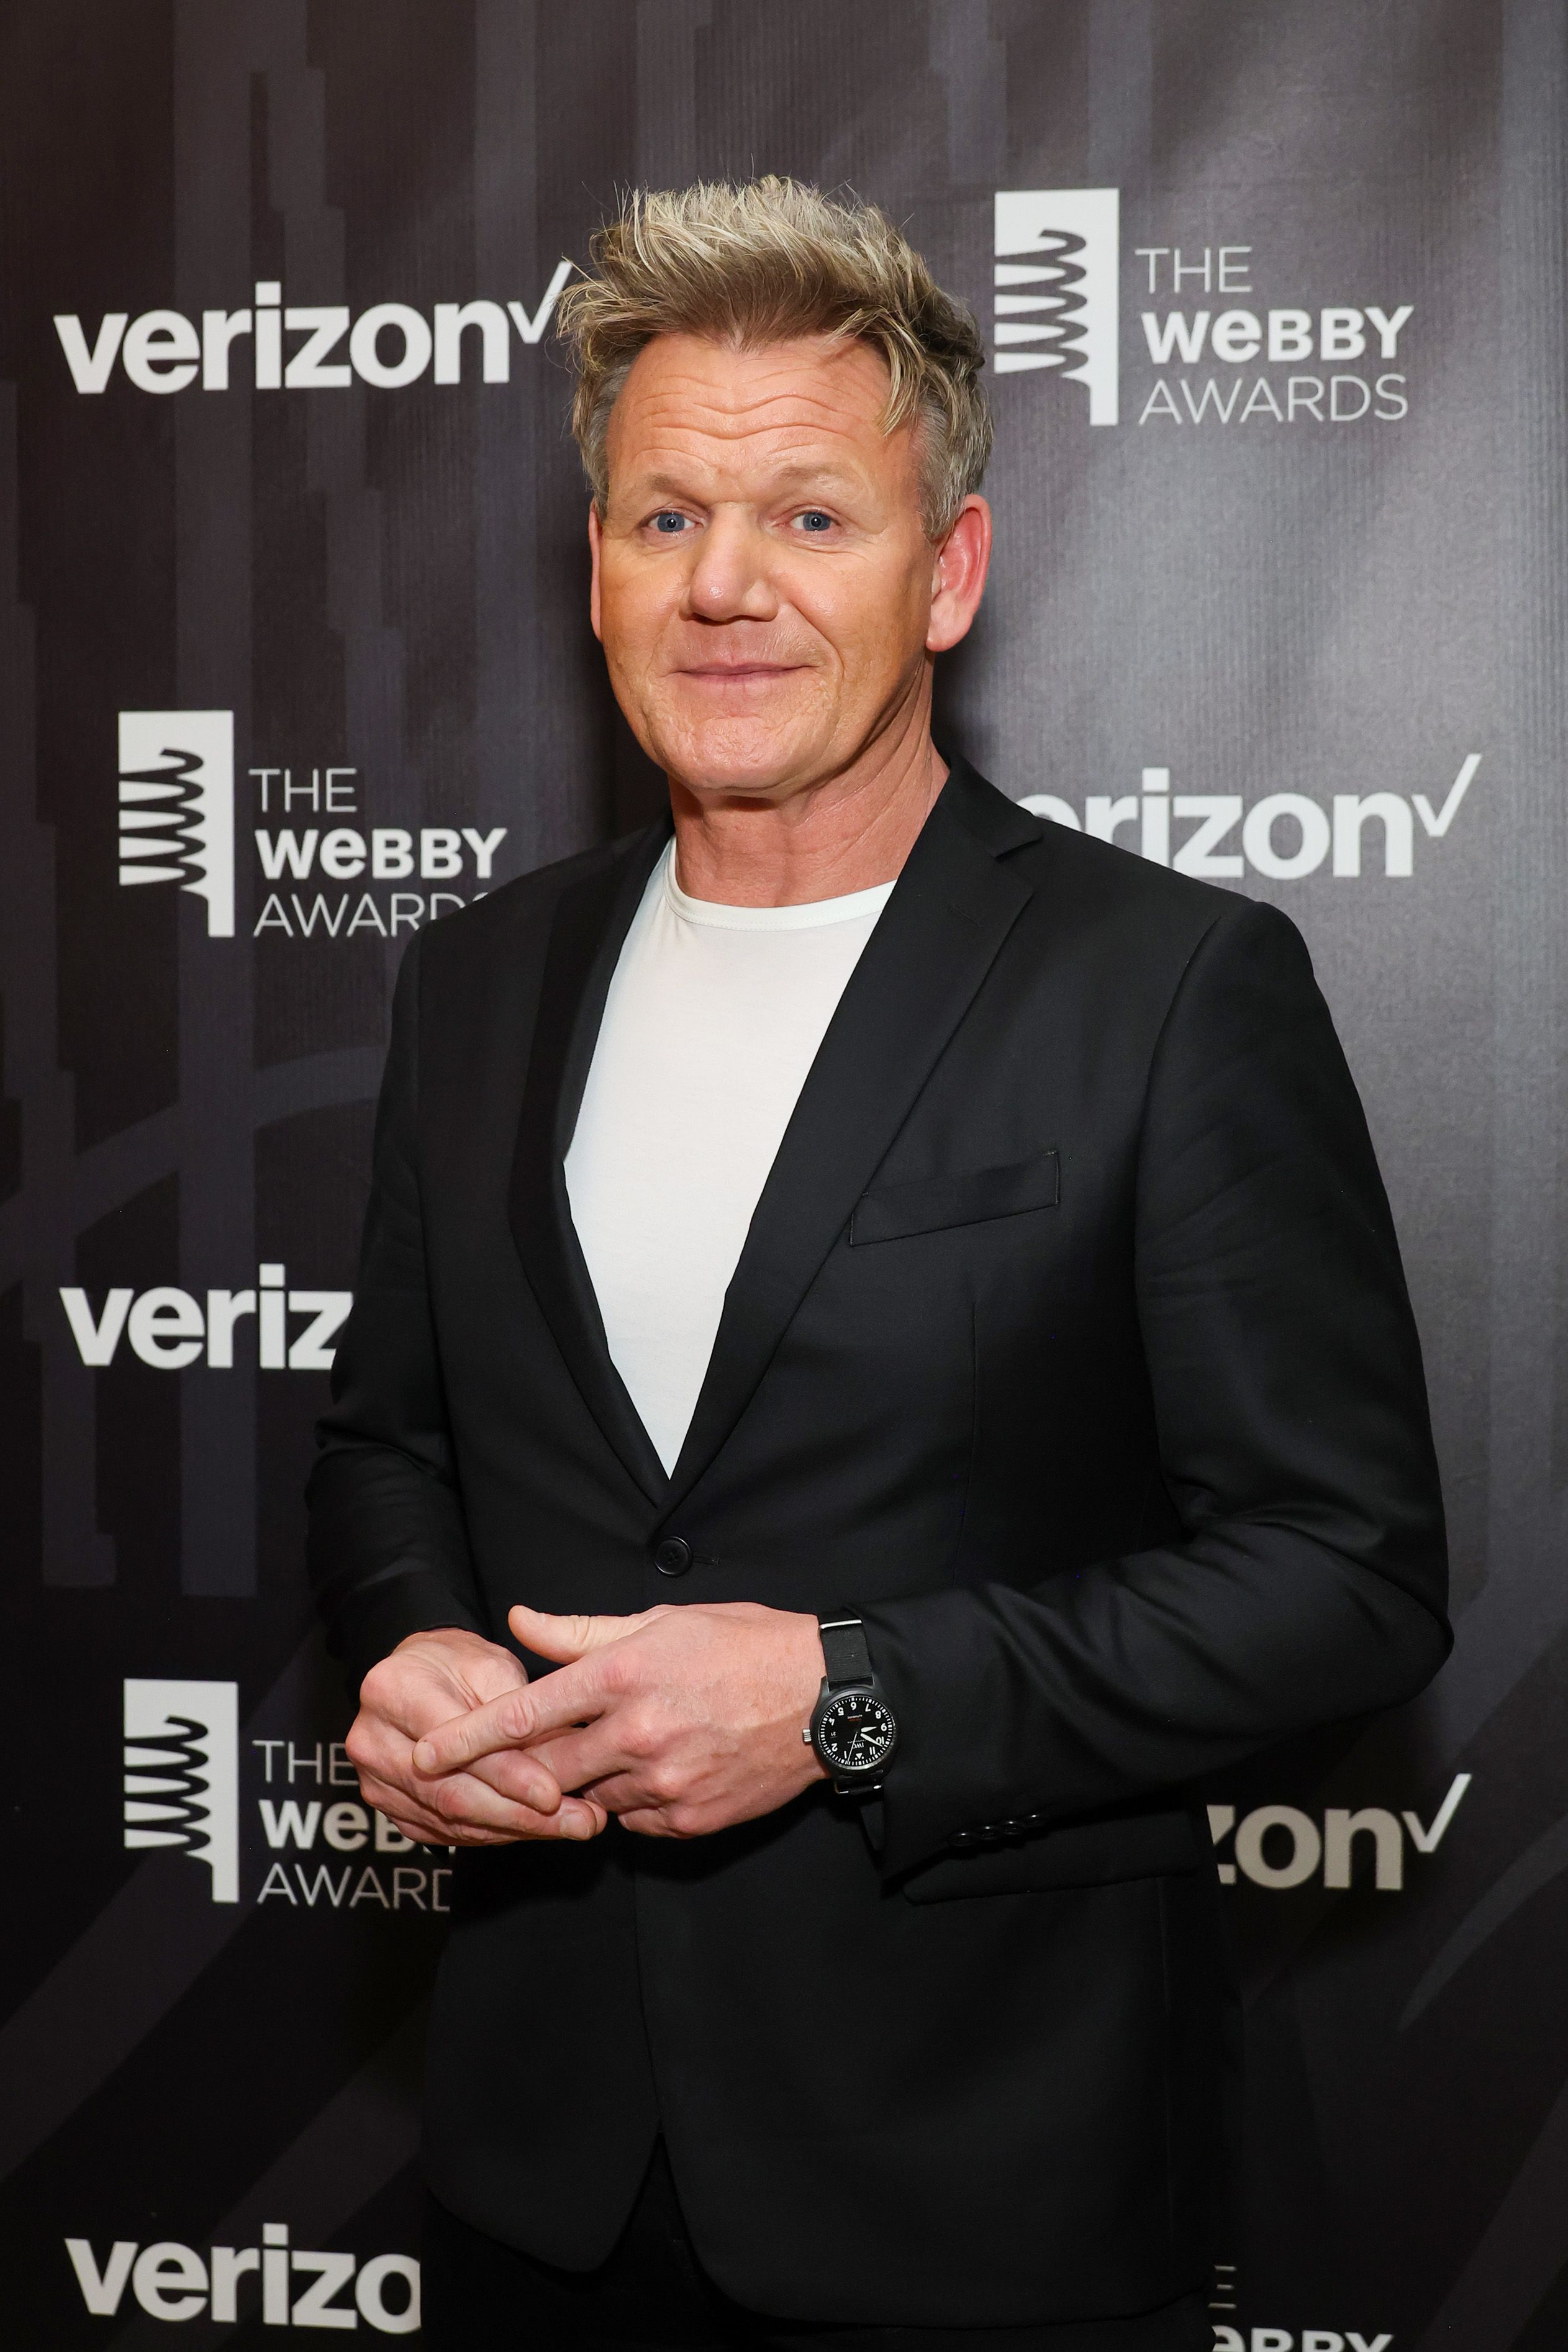 Gordon Ramsay at the 26th Annual Webby Awards in New York City on May 16, 2022 | Source: Getty Images